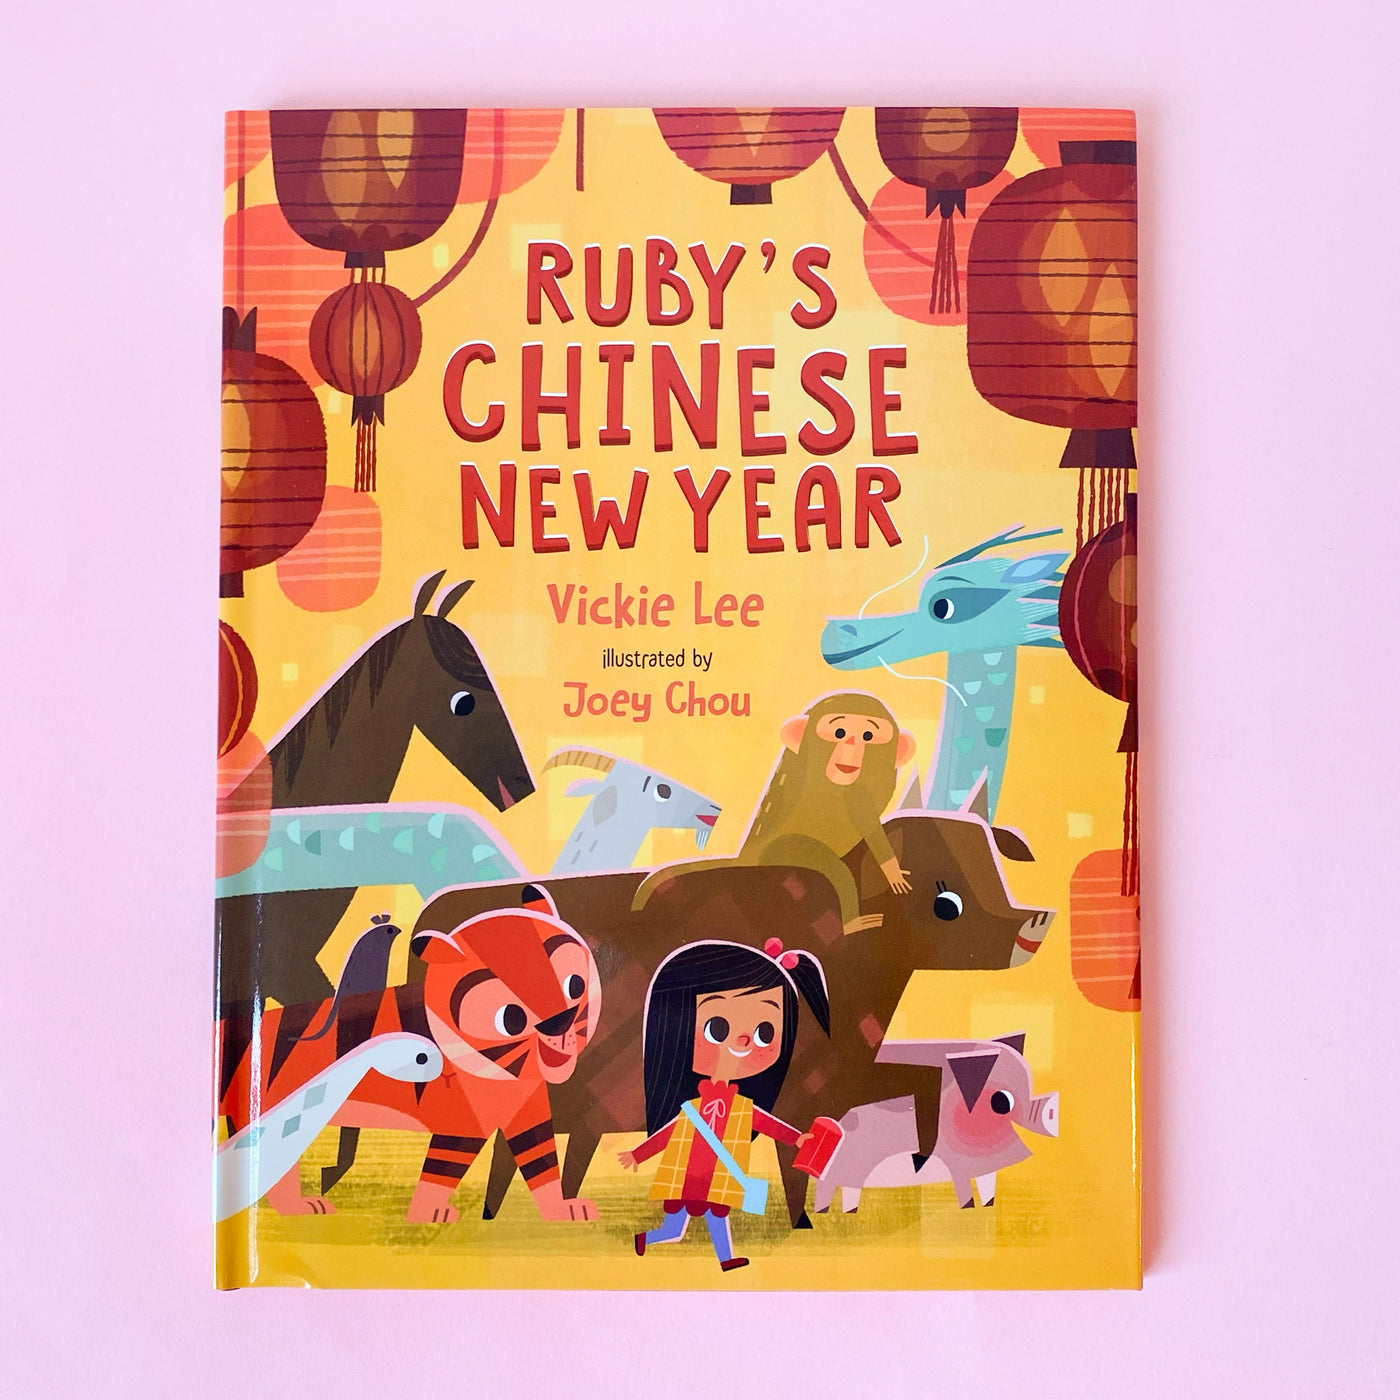 Ruby's Chinese New Year by Vickie Lee and Joey Chou